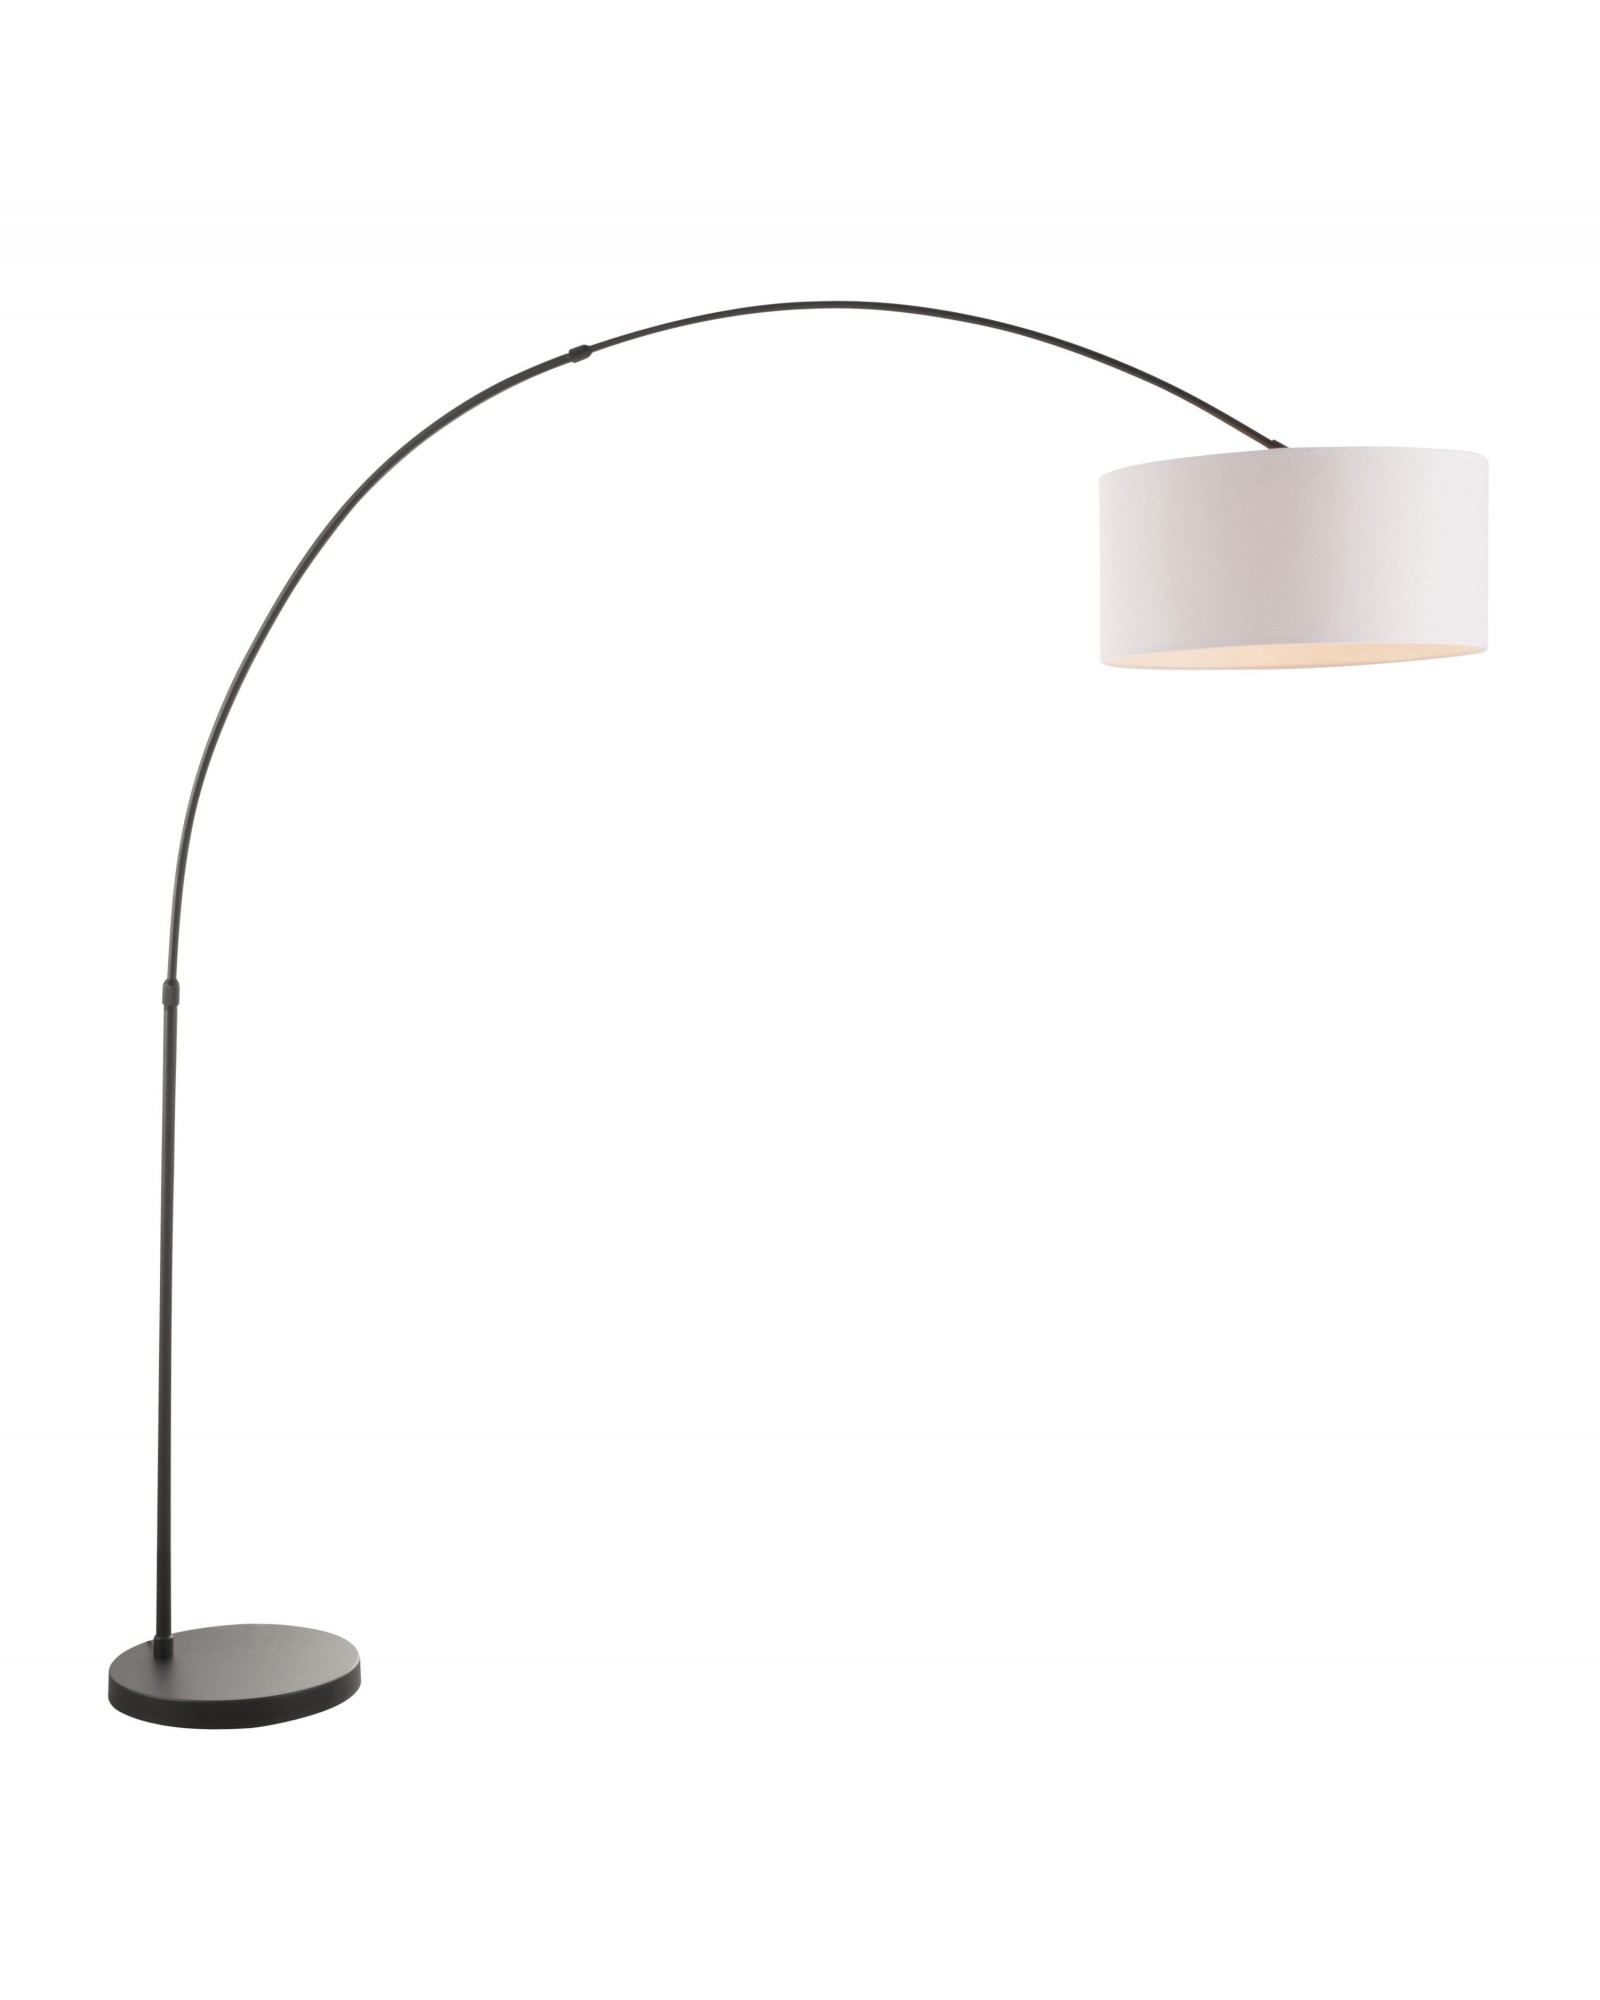 Salon Contemporary Floor Lamp with Black Base and White Shade